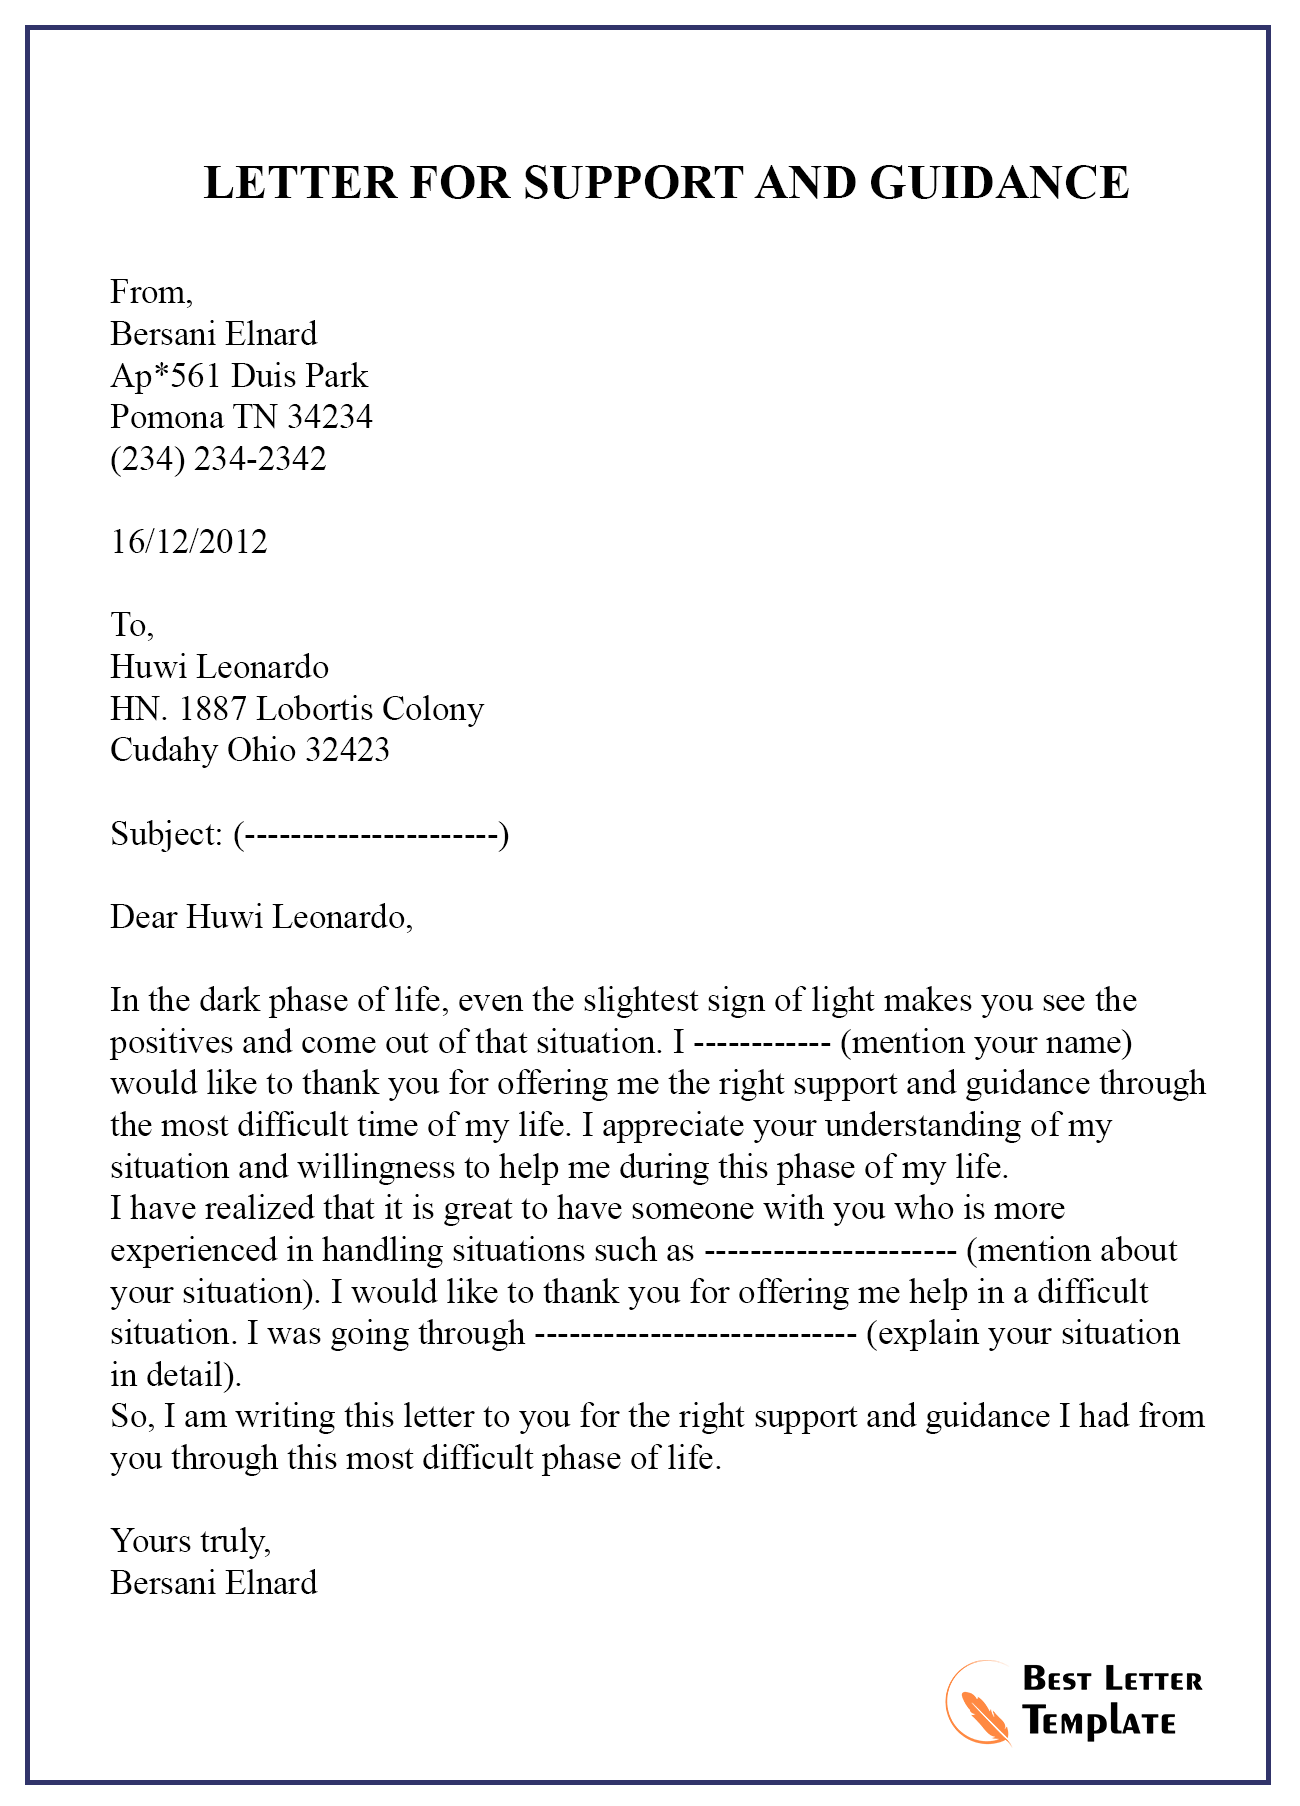 Thanks Letter For Support And Guidance Best Letter Template